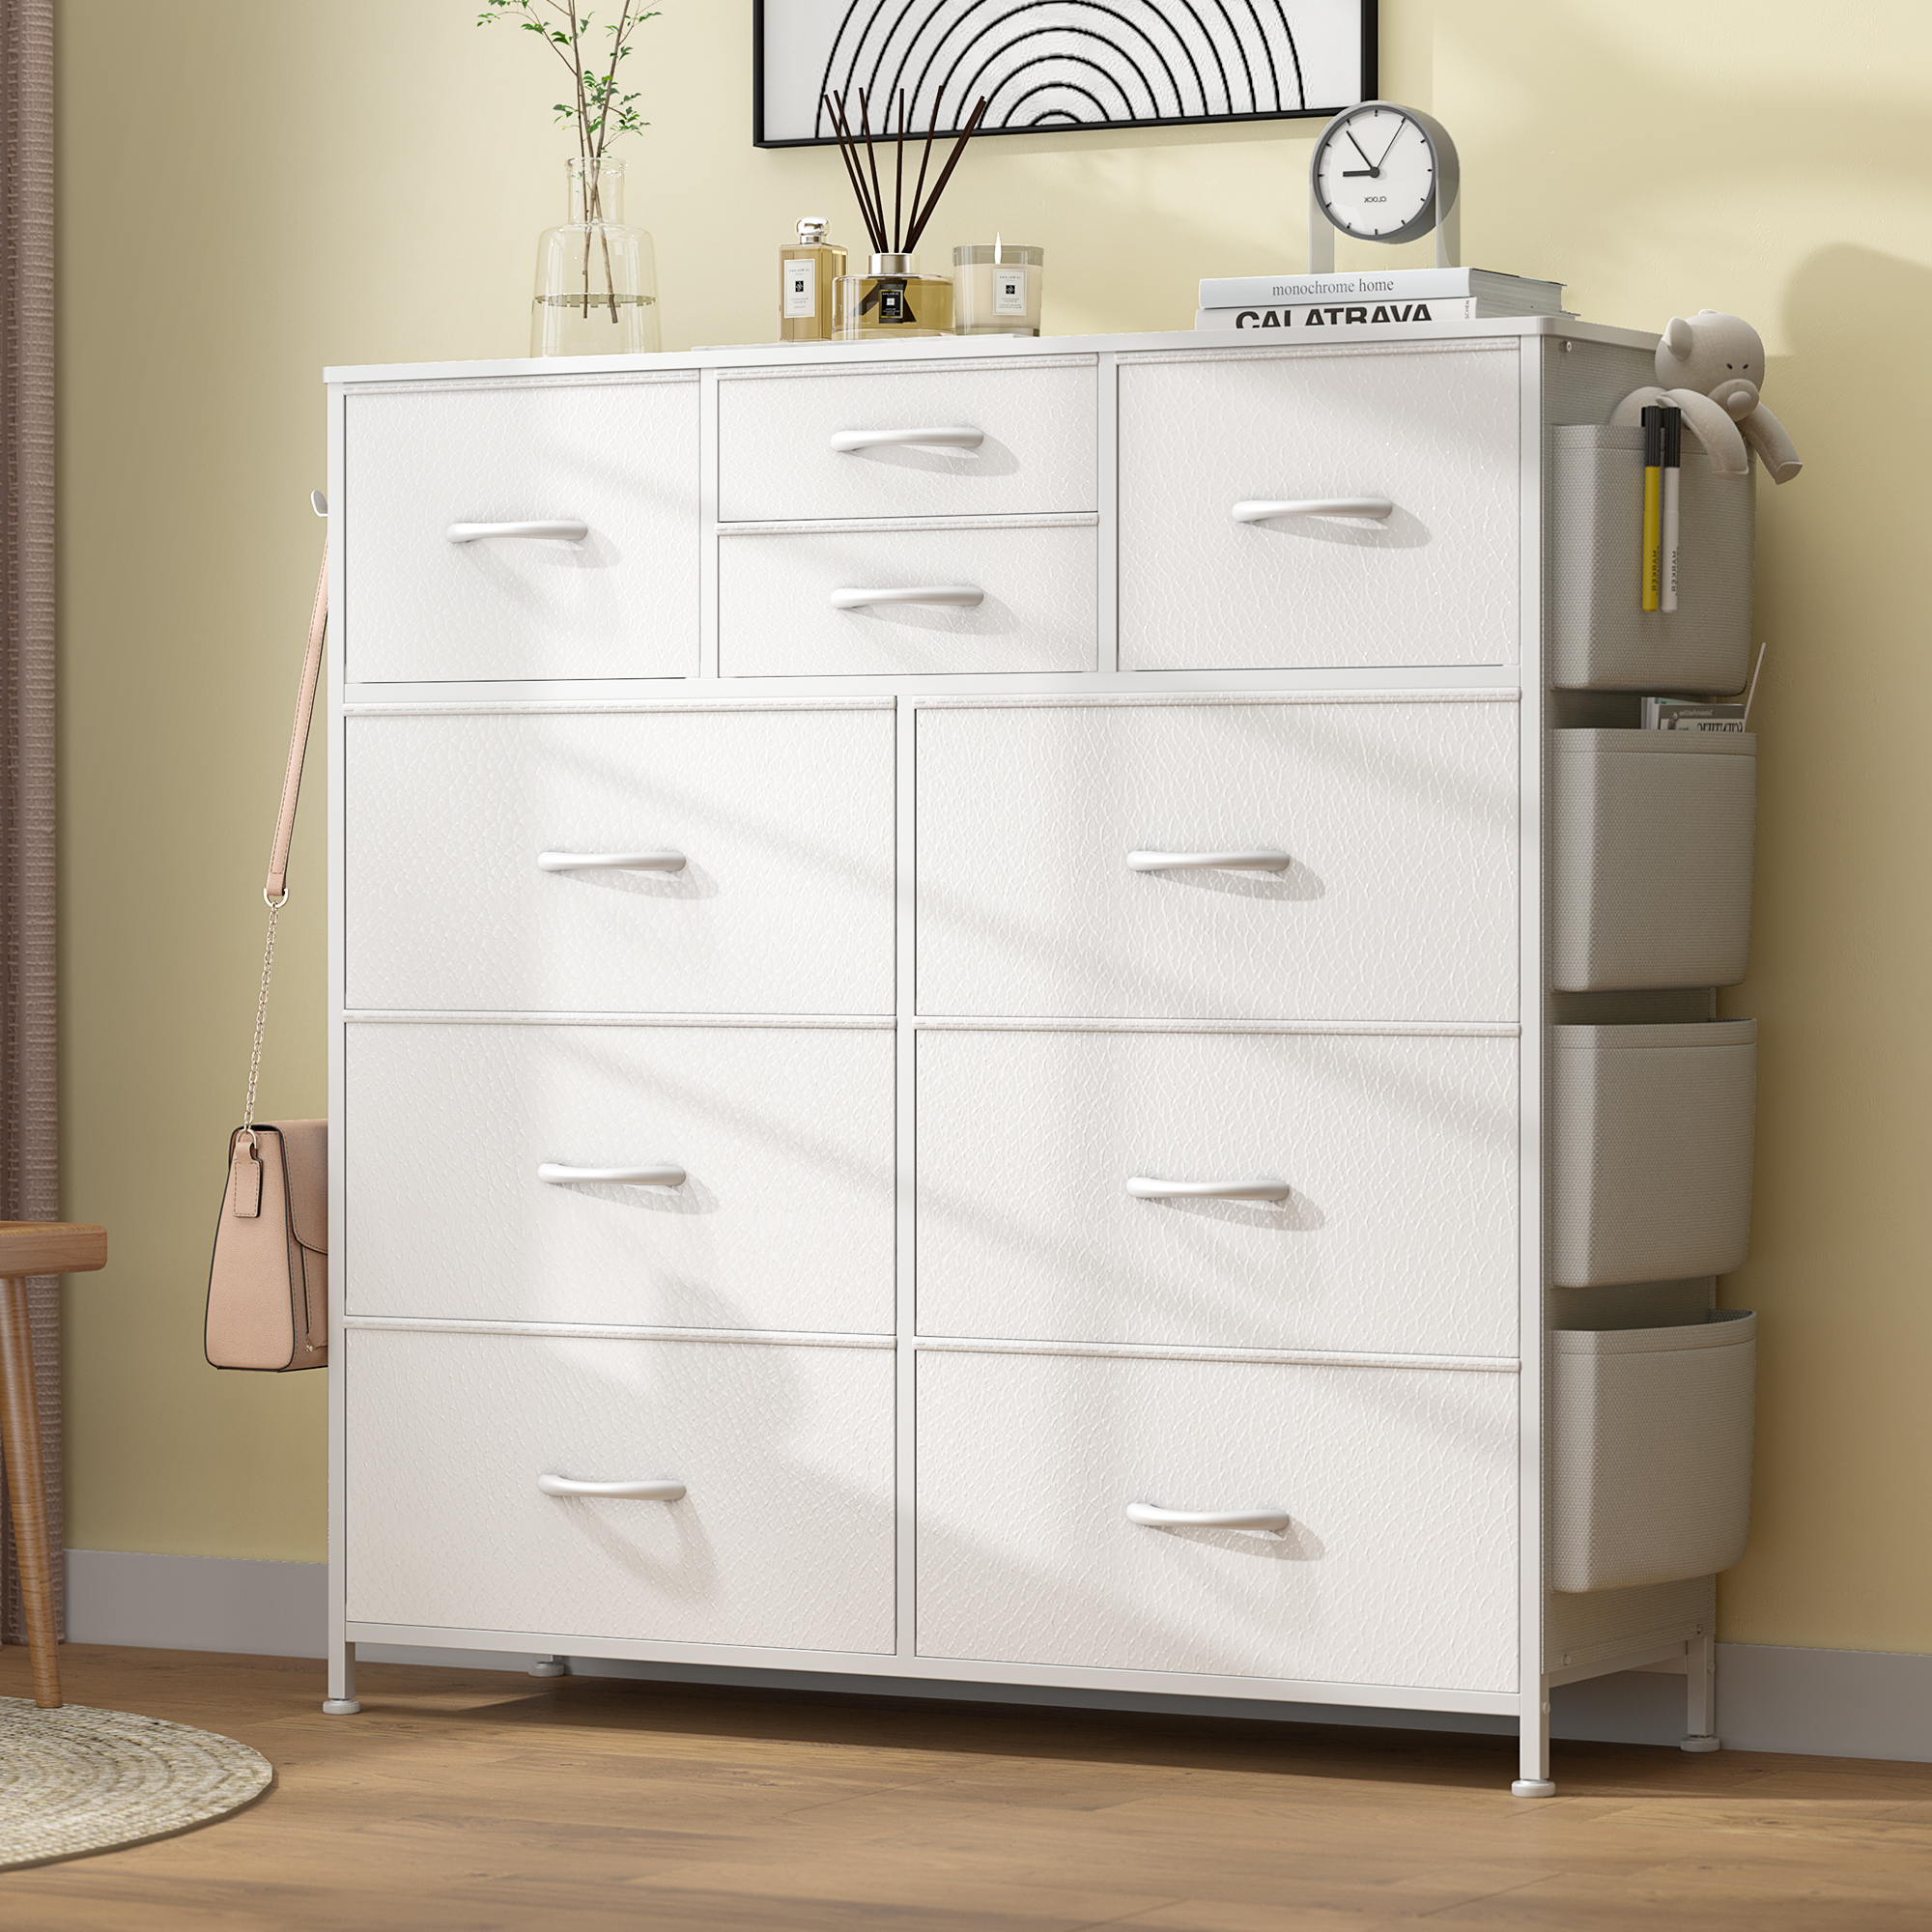 GIKPAL 10 Drawer Dresser, Chest of Drawers for Bedroom with Side Pockets and Hooks, White - image 1 of 10